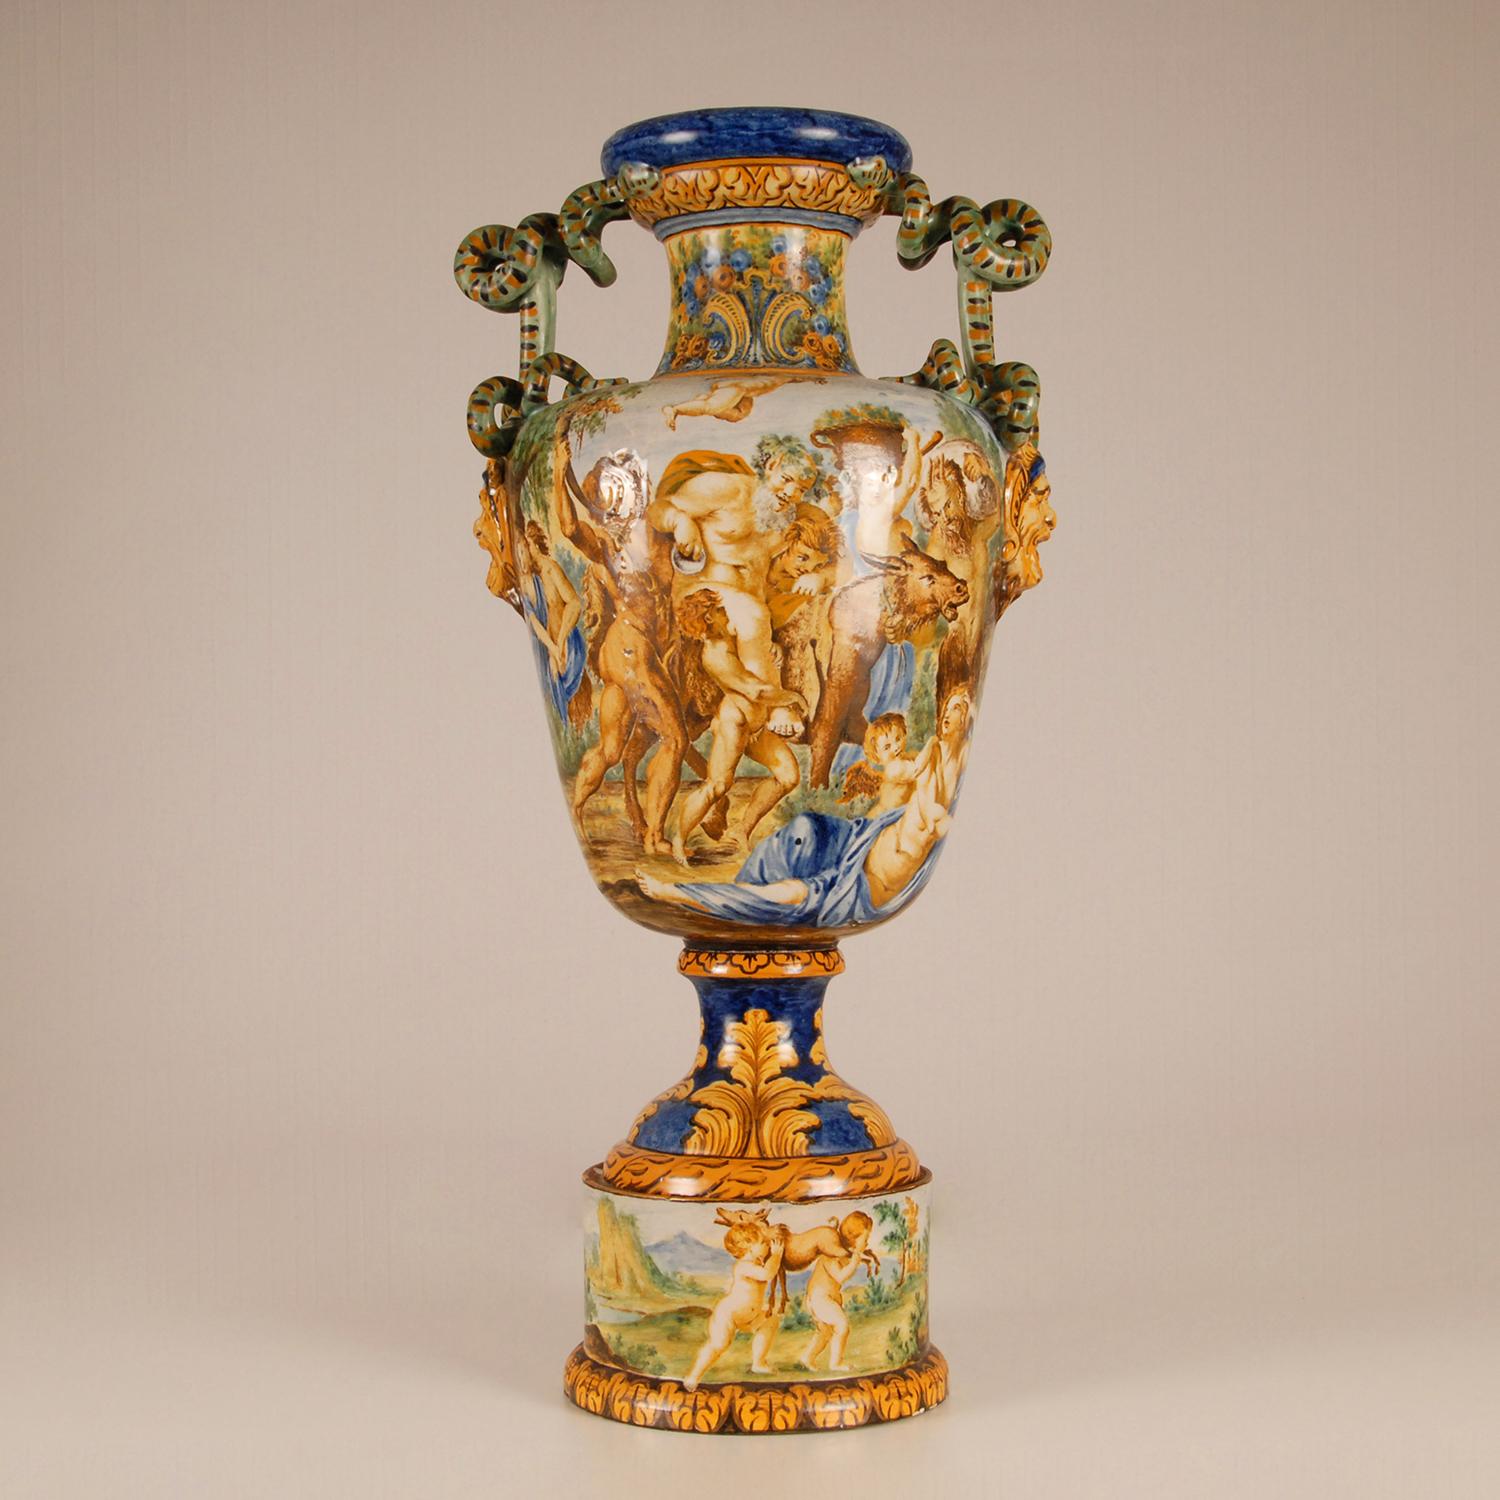 Tall Italian majolica serpentine handles vase with a mythological scene
Depicting The Triumph of Bacchus and Ariadne - Annibale Carracci - 1597 - Farnese Gallery, Rome
Part of the ceiling fresco 